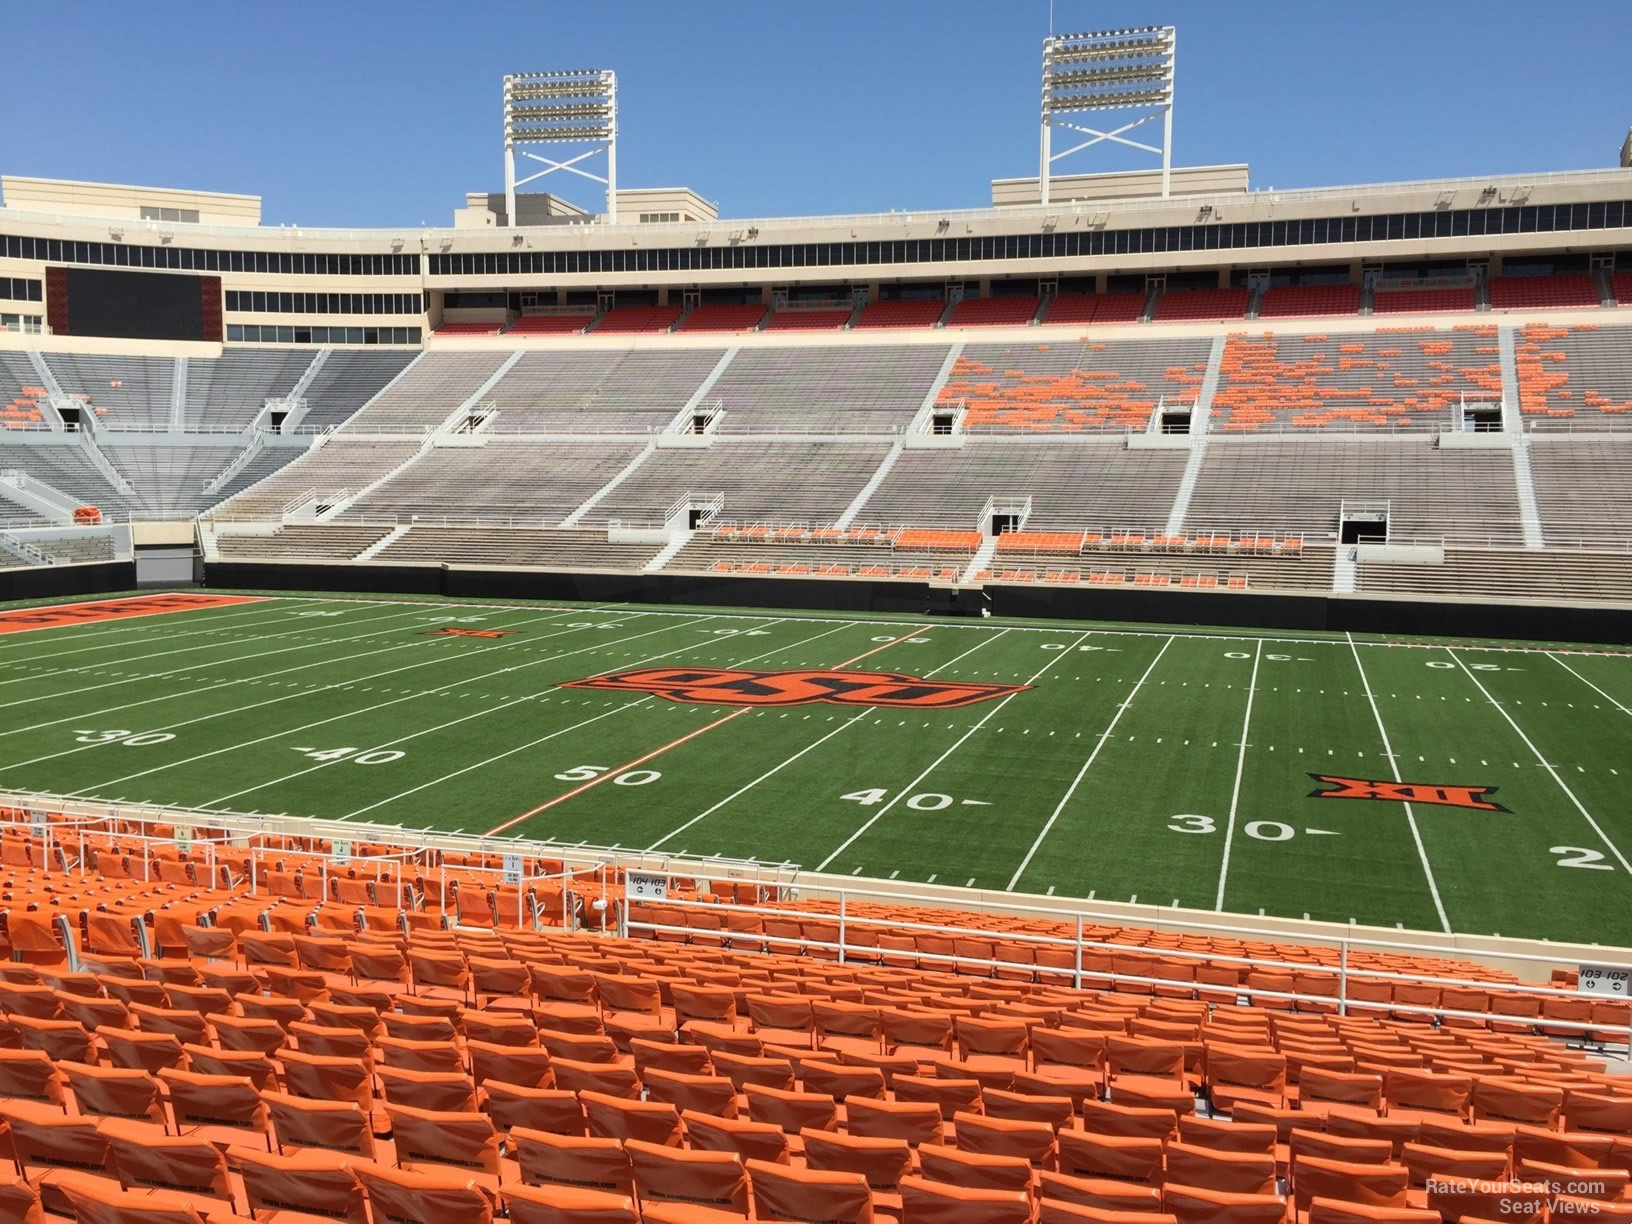 section 204, row 20 seat view  - boone pickens stadium